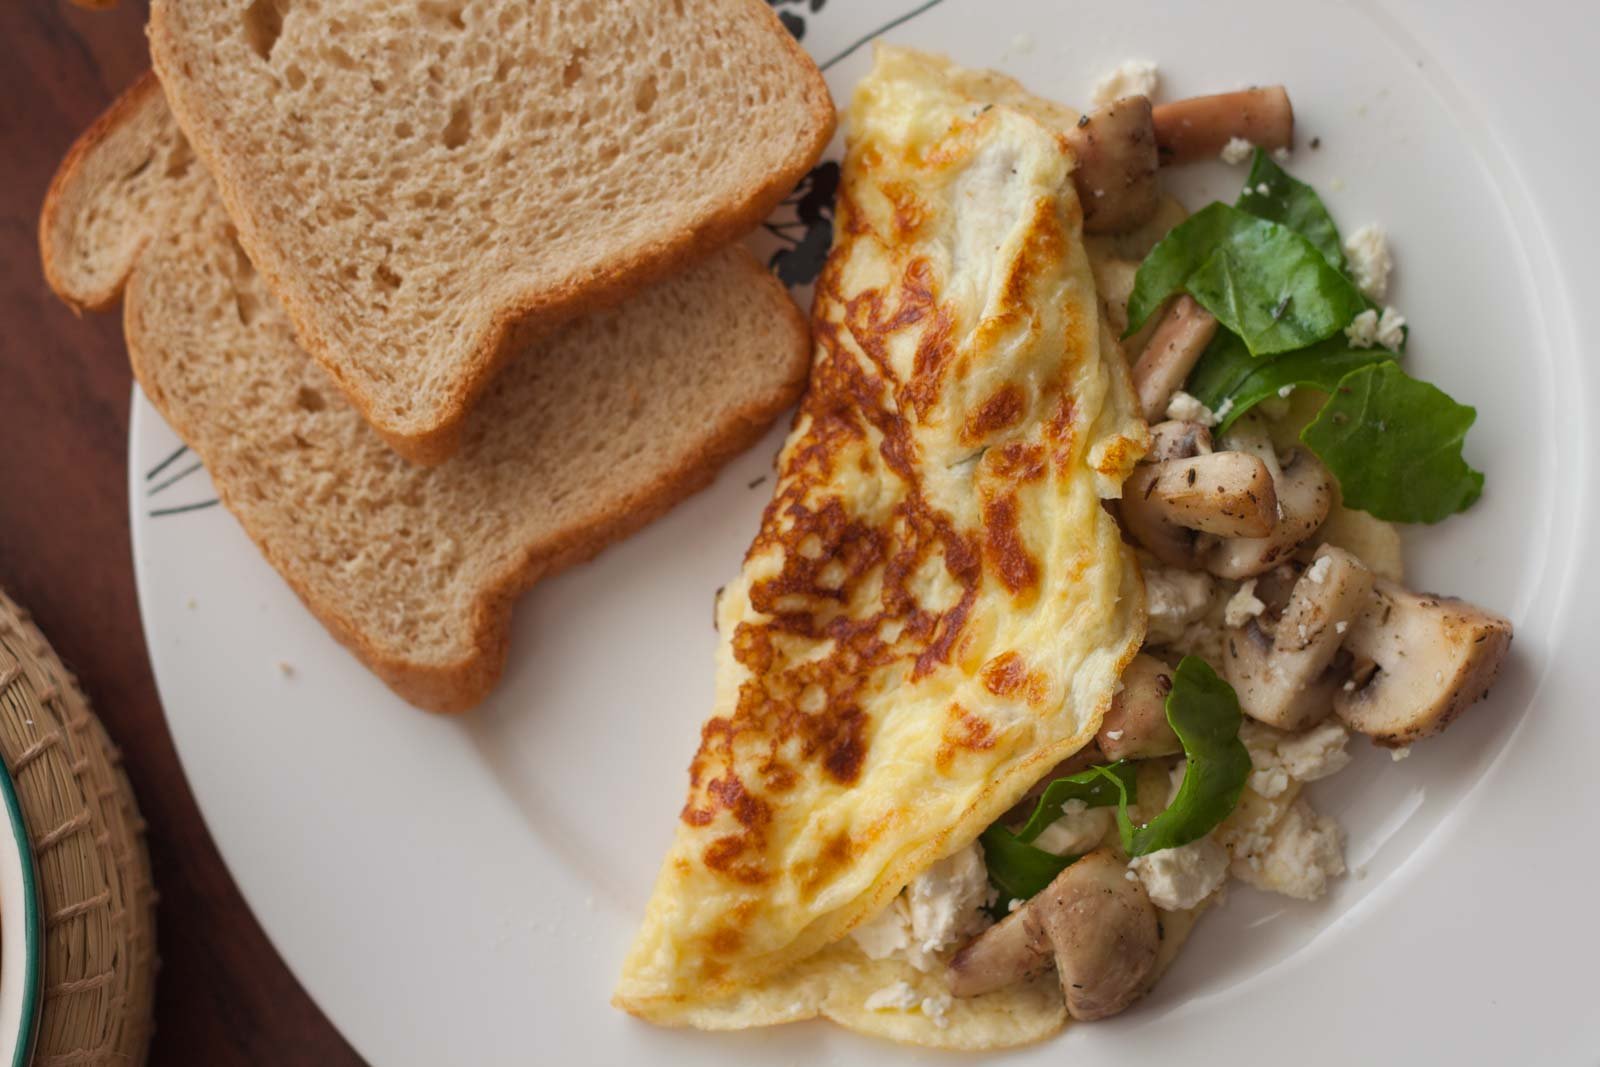 Omelette stuffed with mushroom, spinach and goats cheese